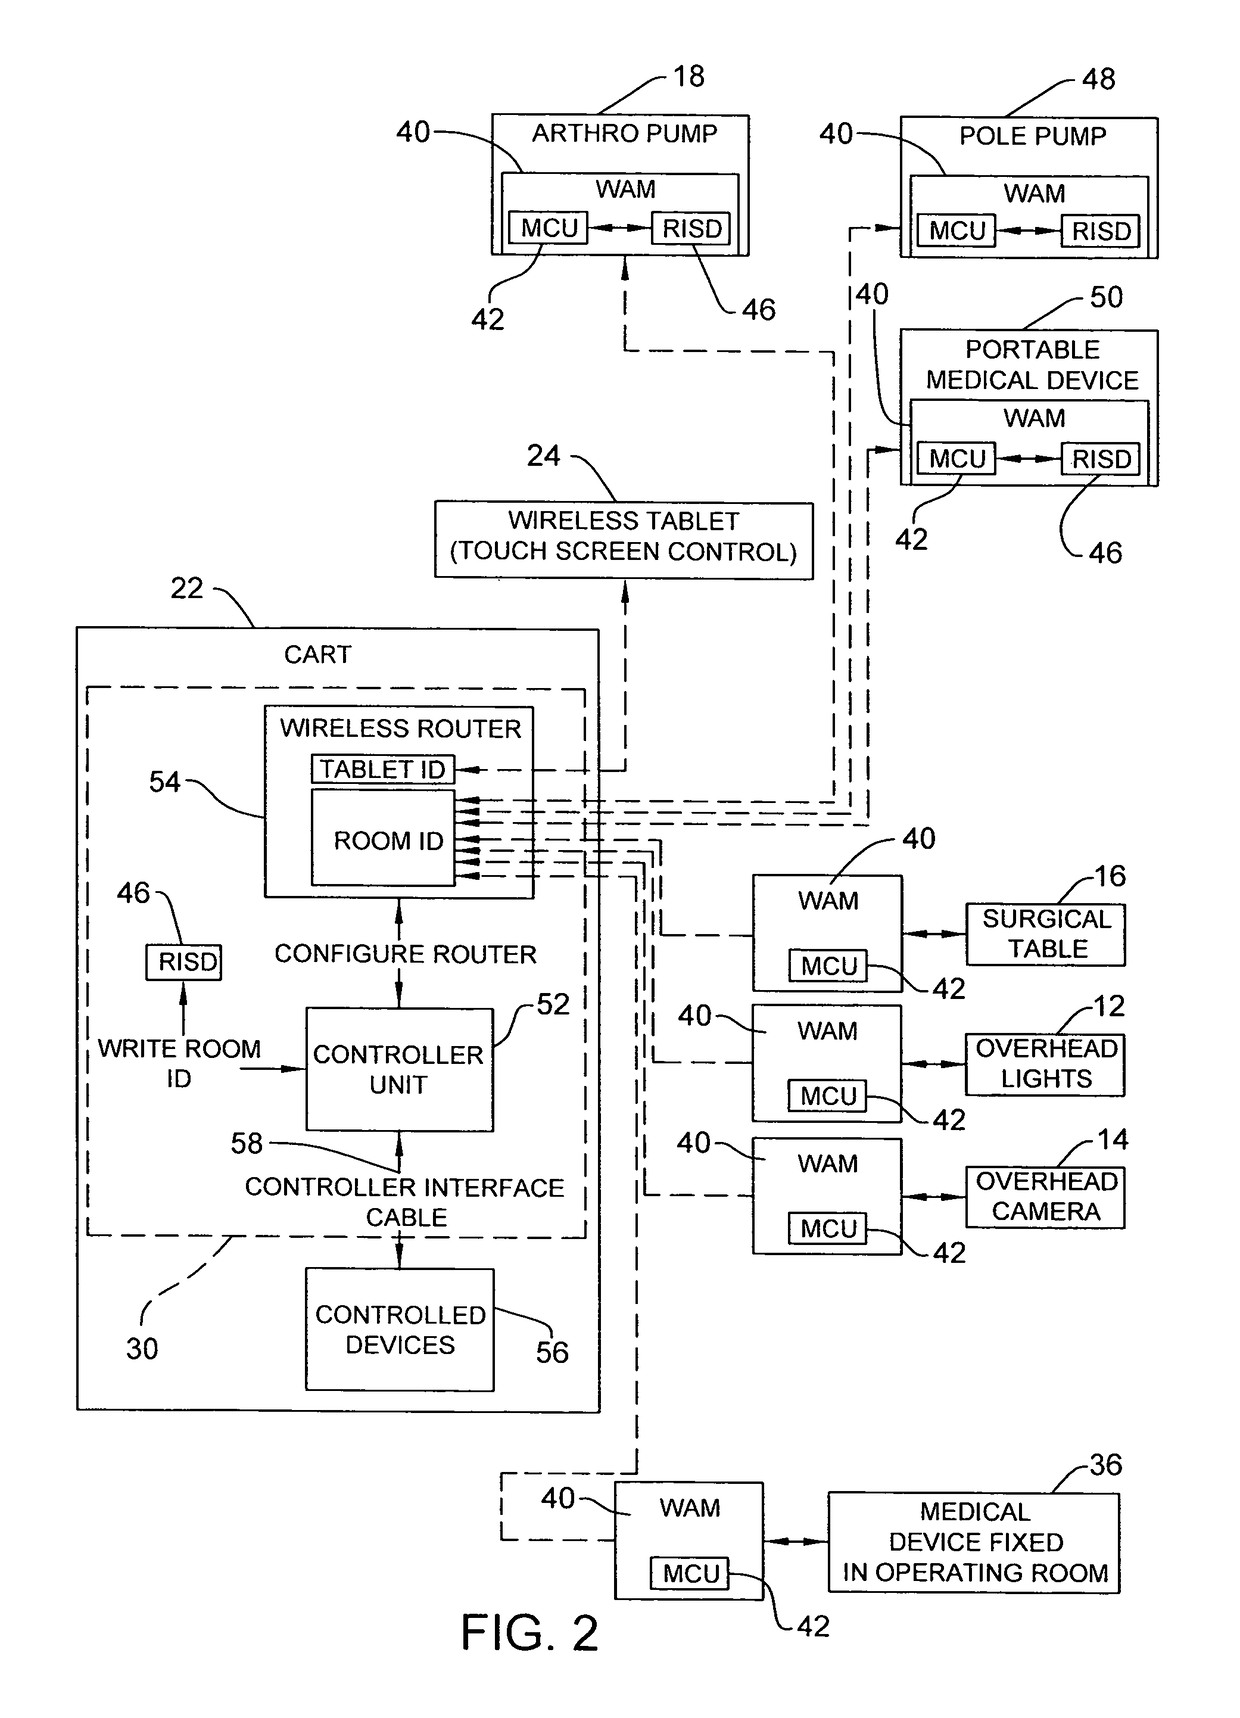 Wireless medical room control arrangement for control of a plurality of medical devices